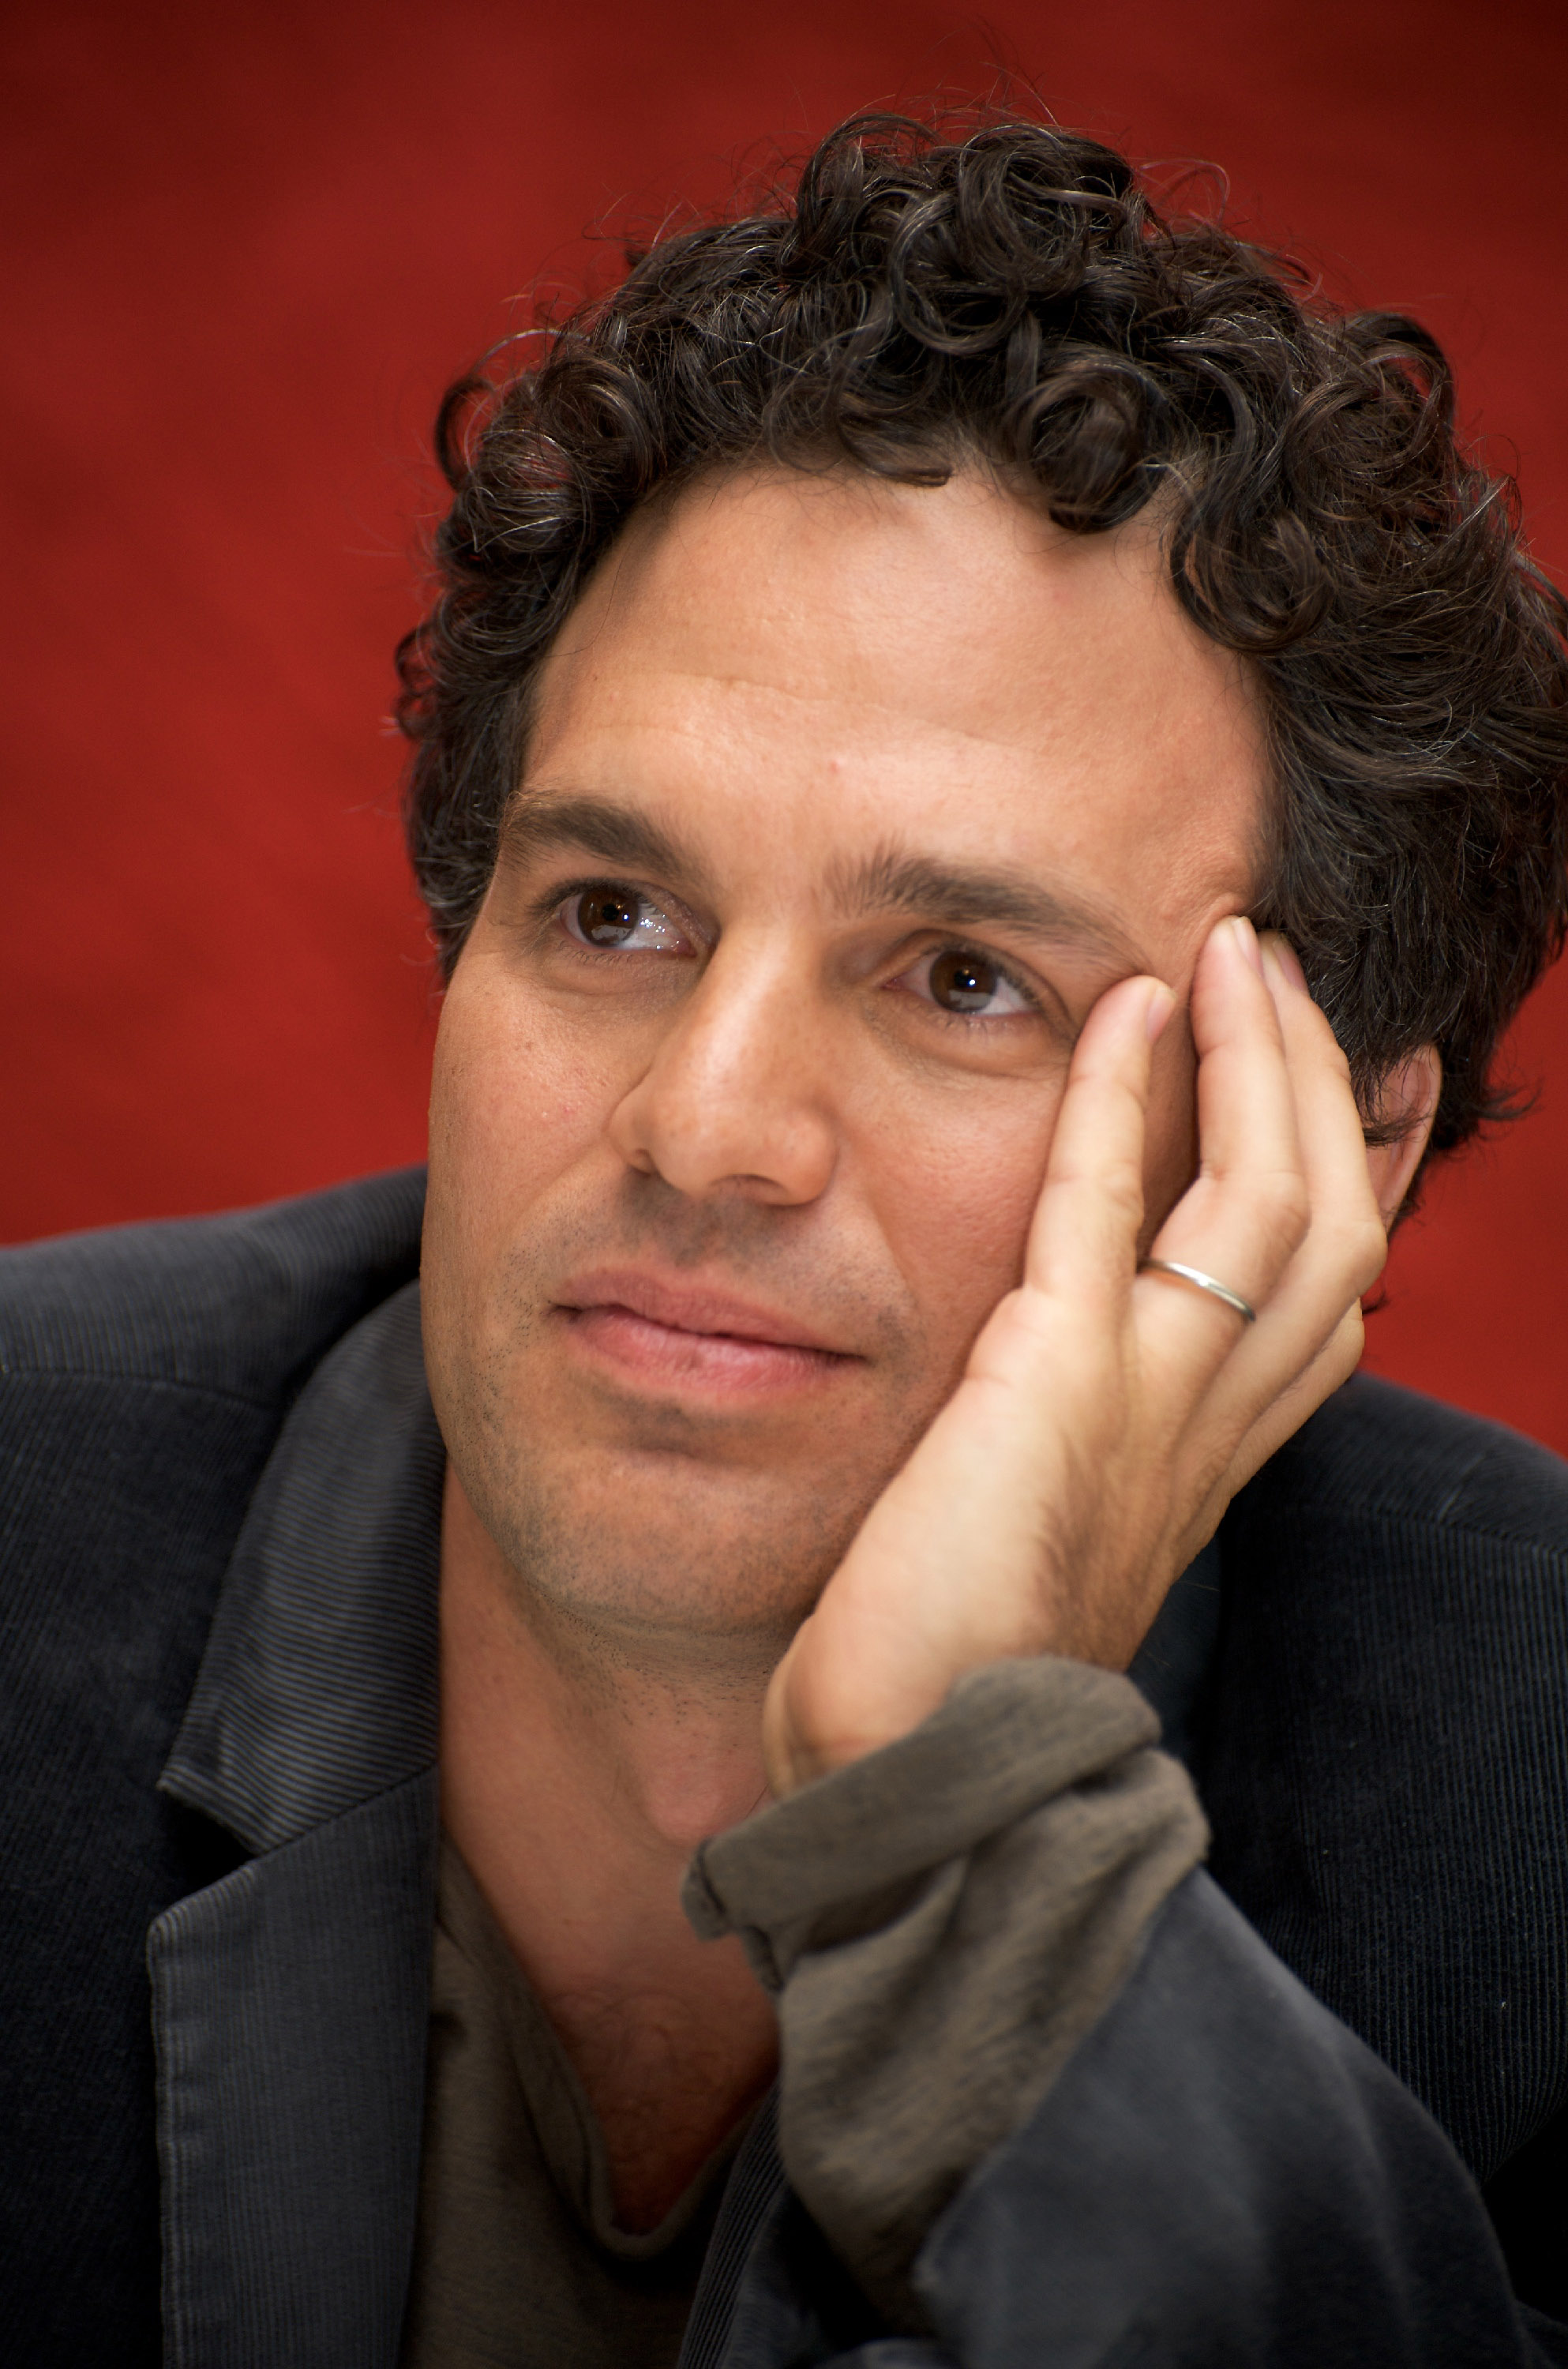 Mark Ruffalo at the press conference for "Blindness" in Toronto, Canada on September 7, 2008 | Source: Getty Images